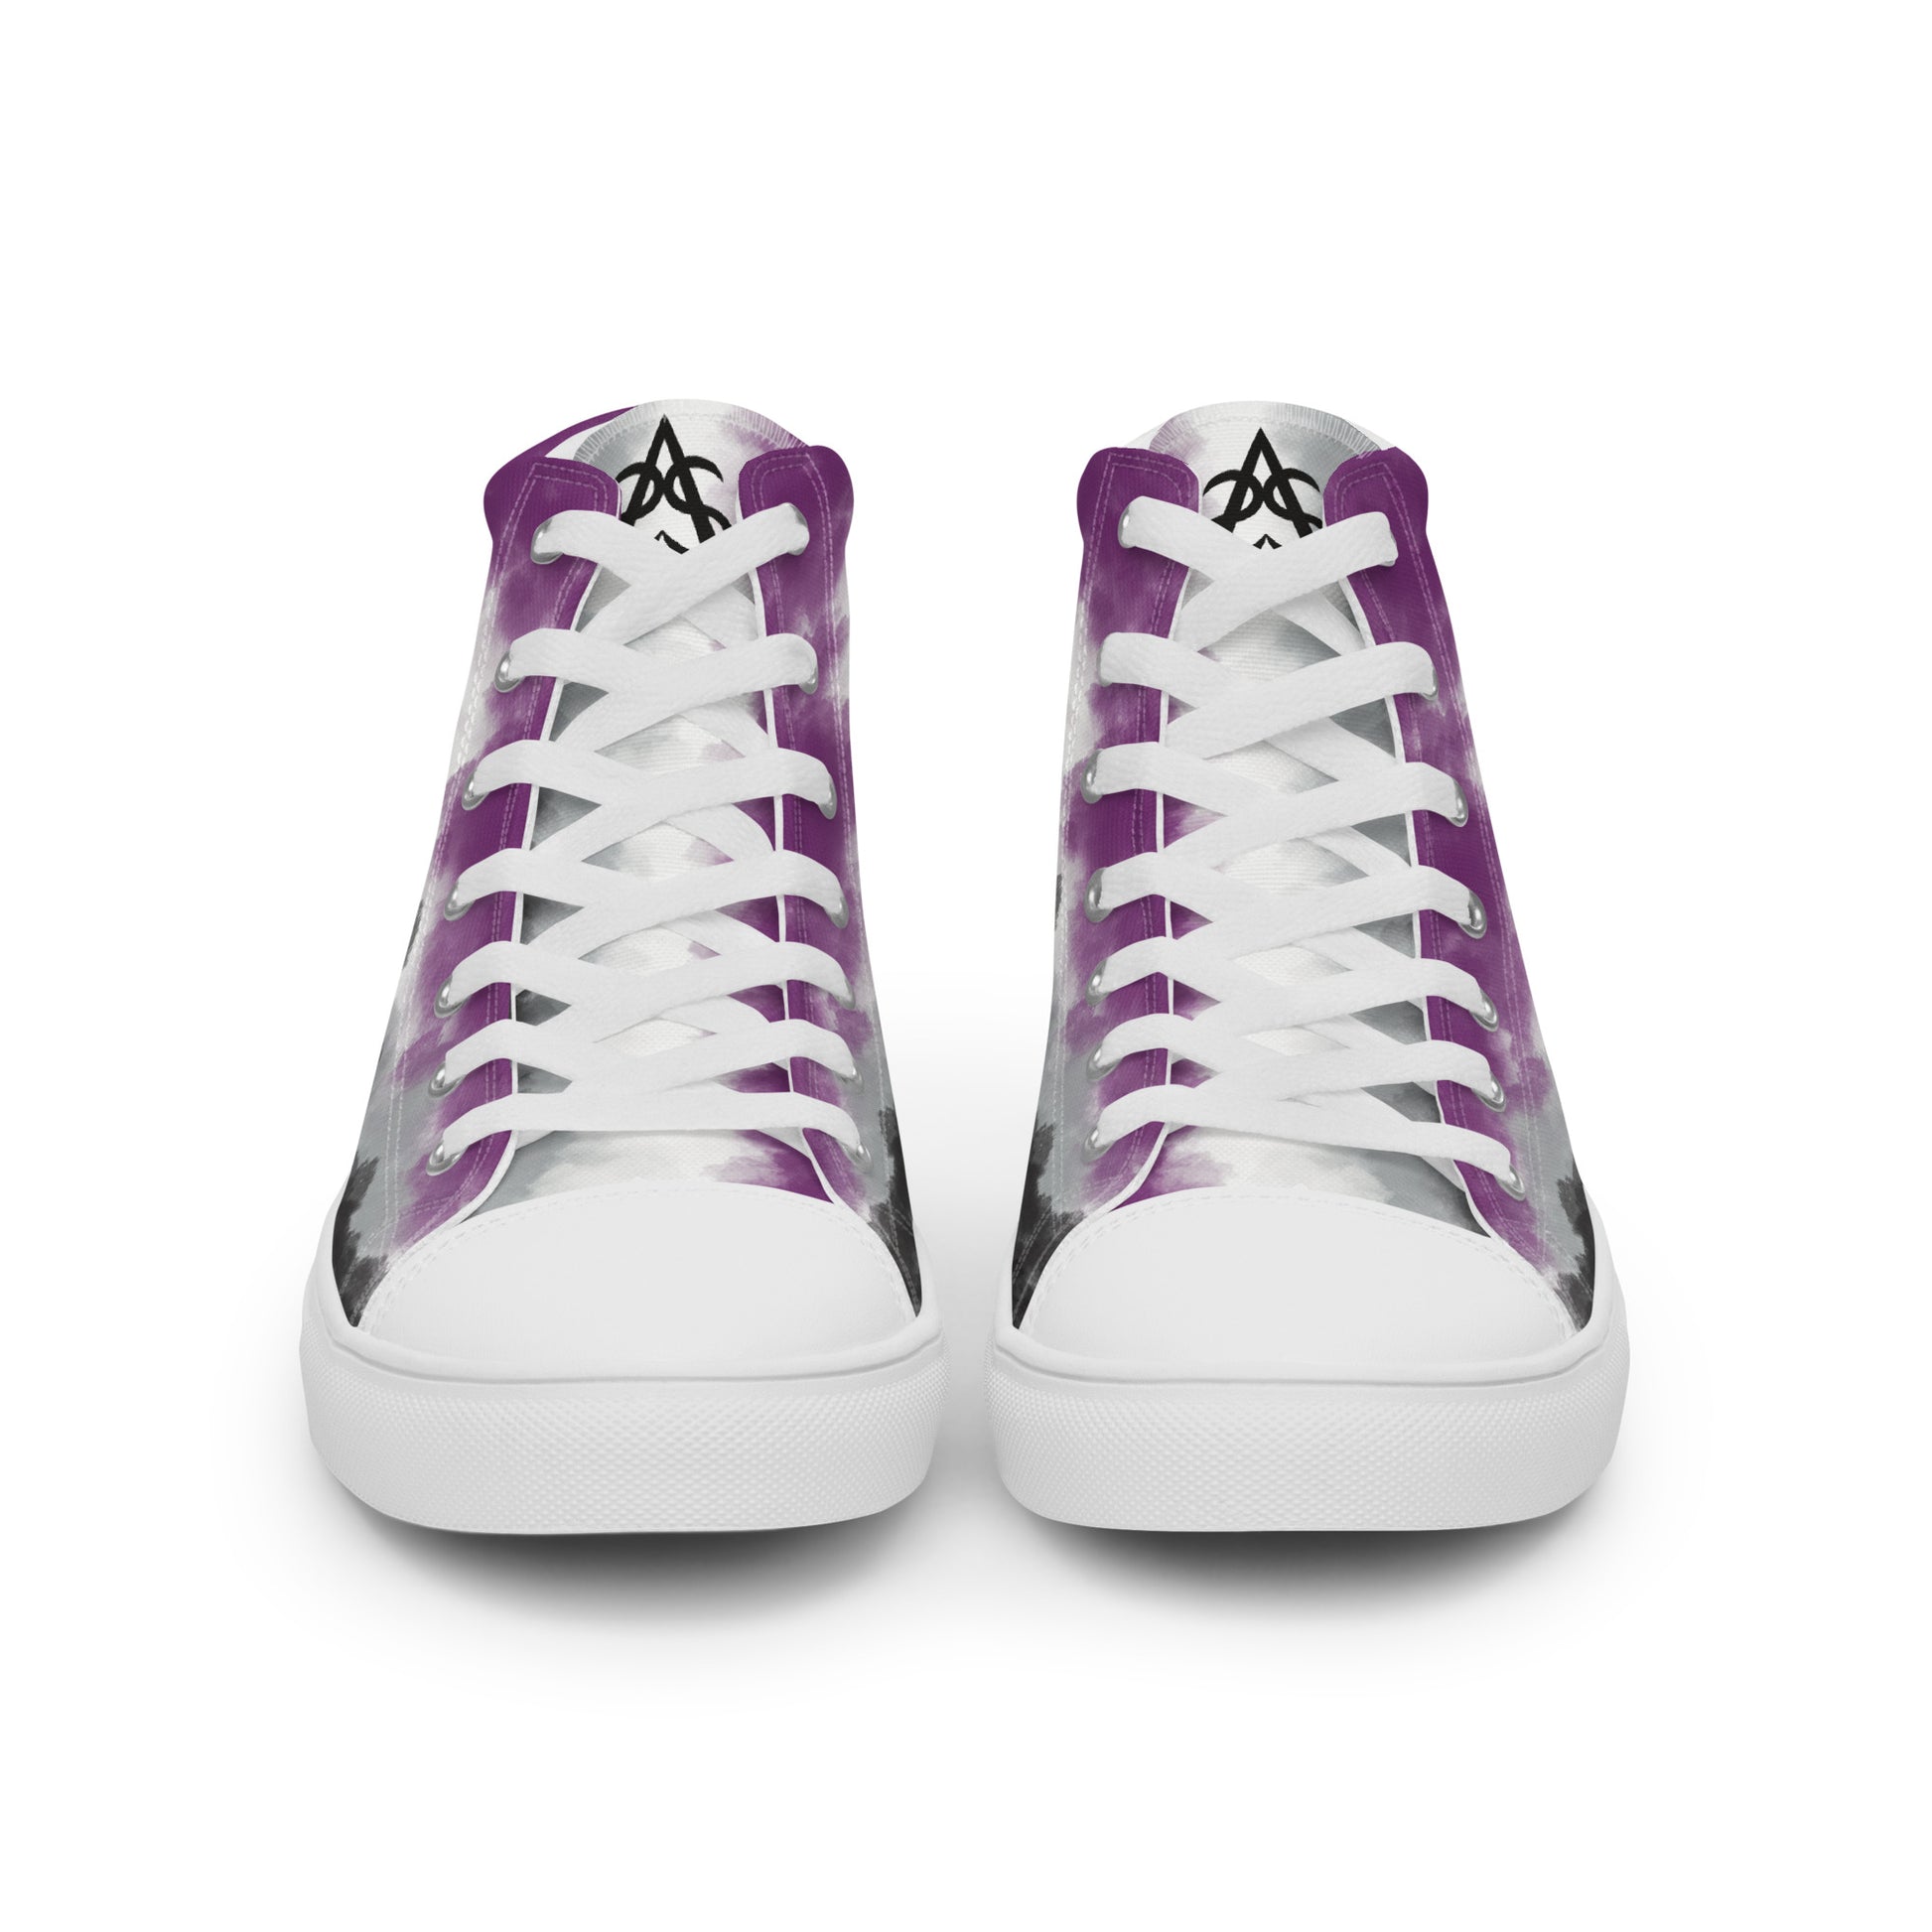 Front view: a pair of high top shoes with clouds in the asexual flag colors, a hand drawn white heart on the heel, white laces and accents, and the Aras Sivad Studio logo on the tongue.